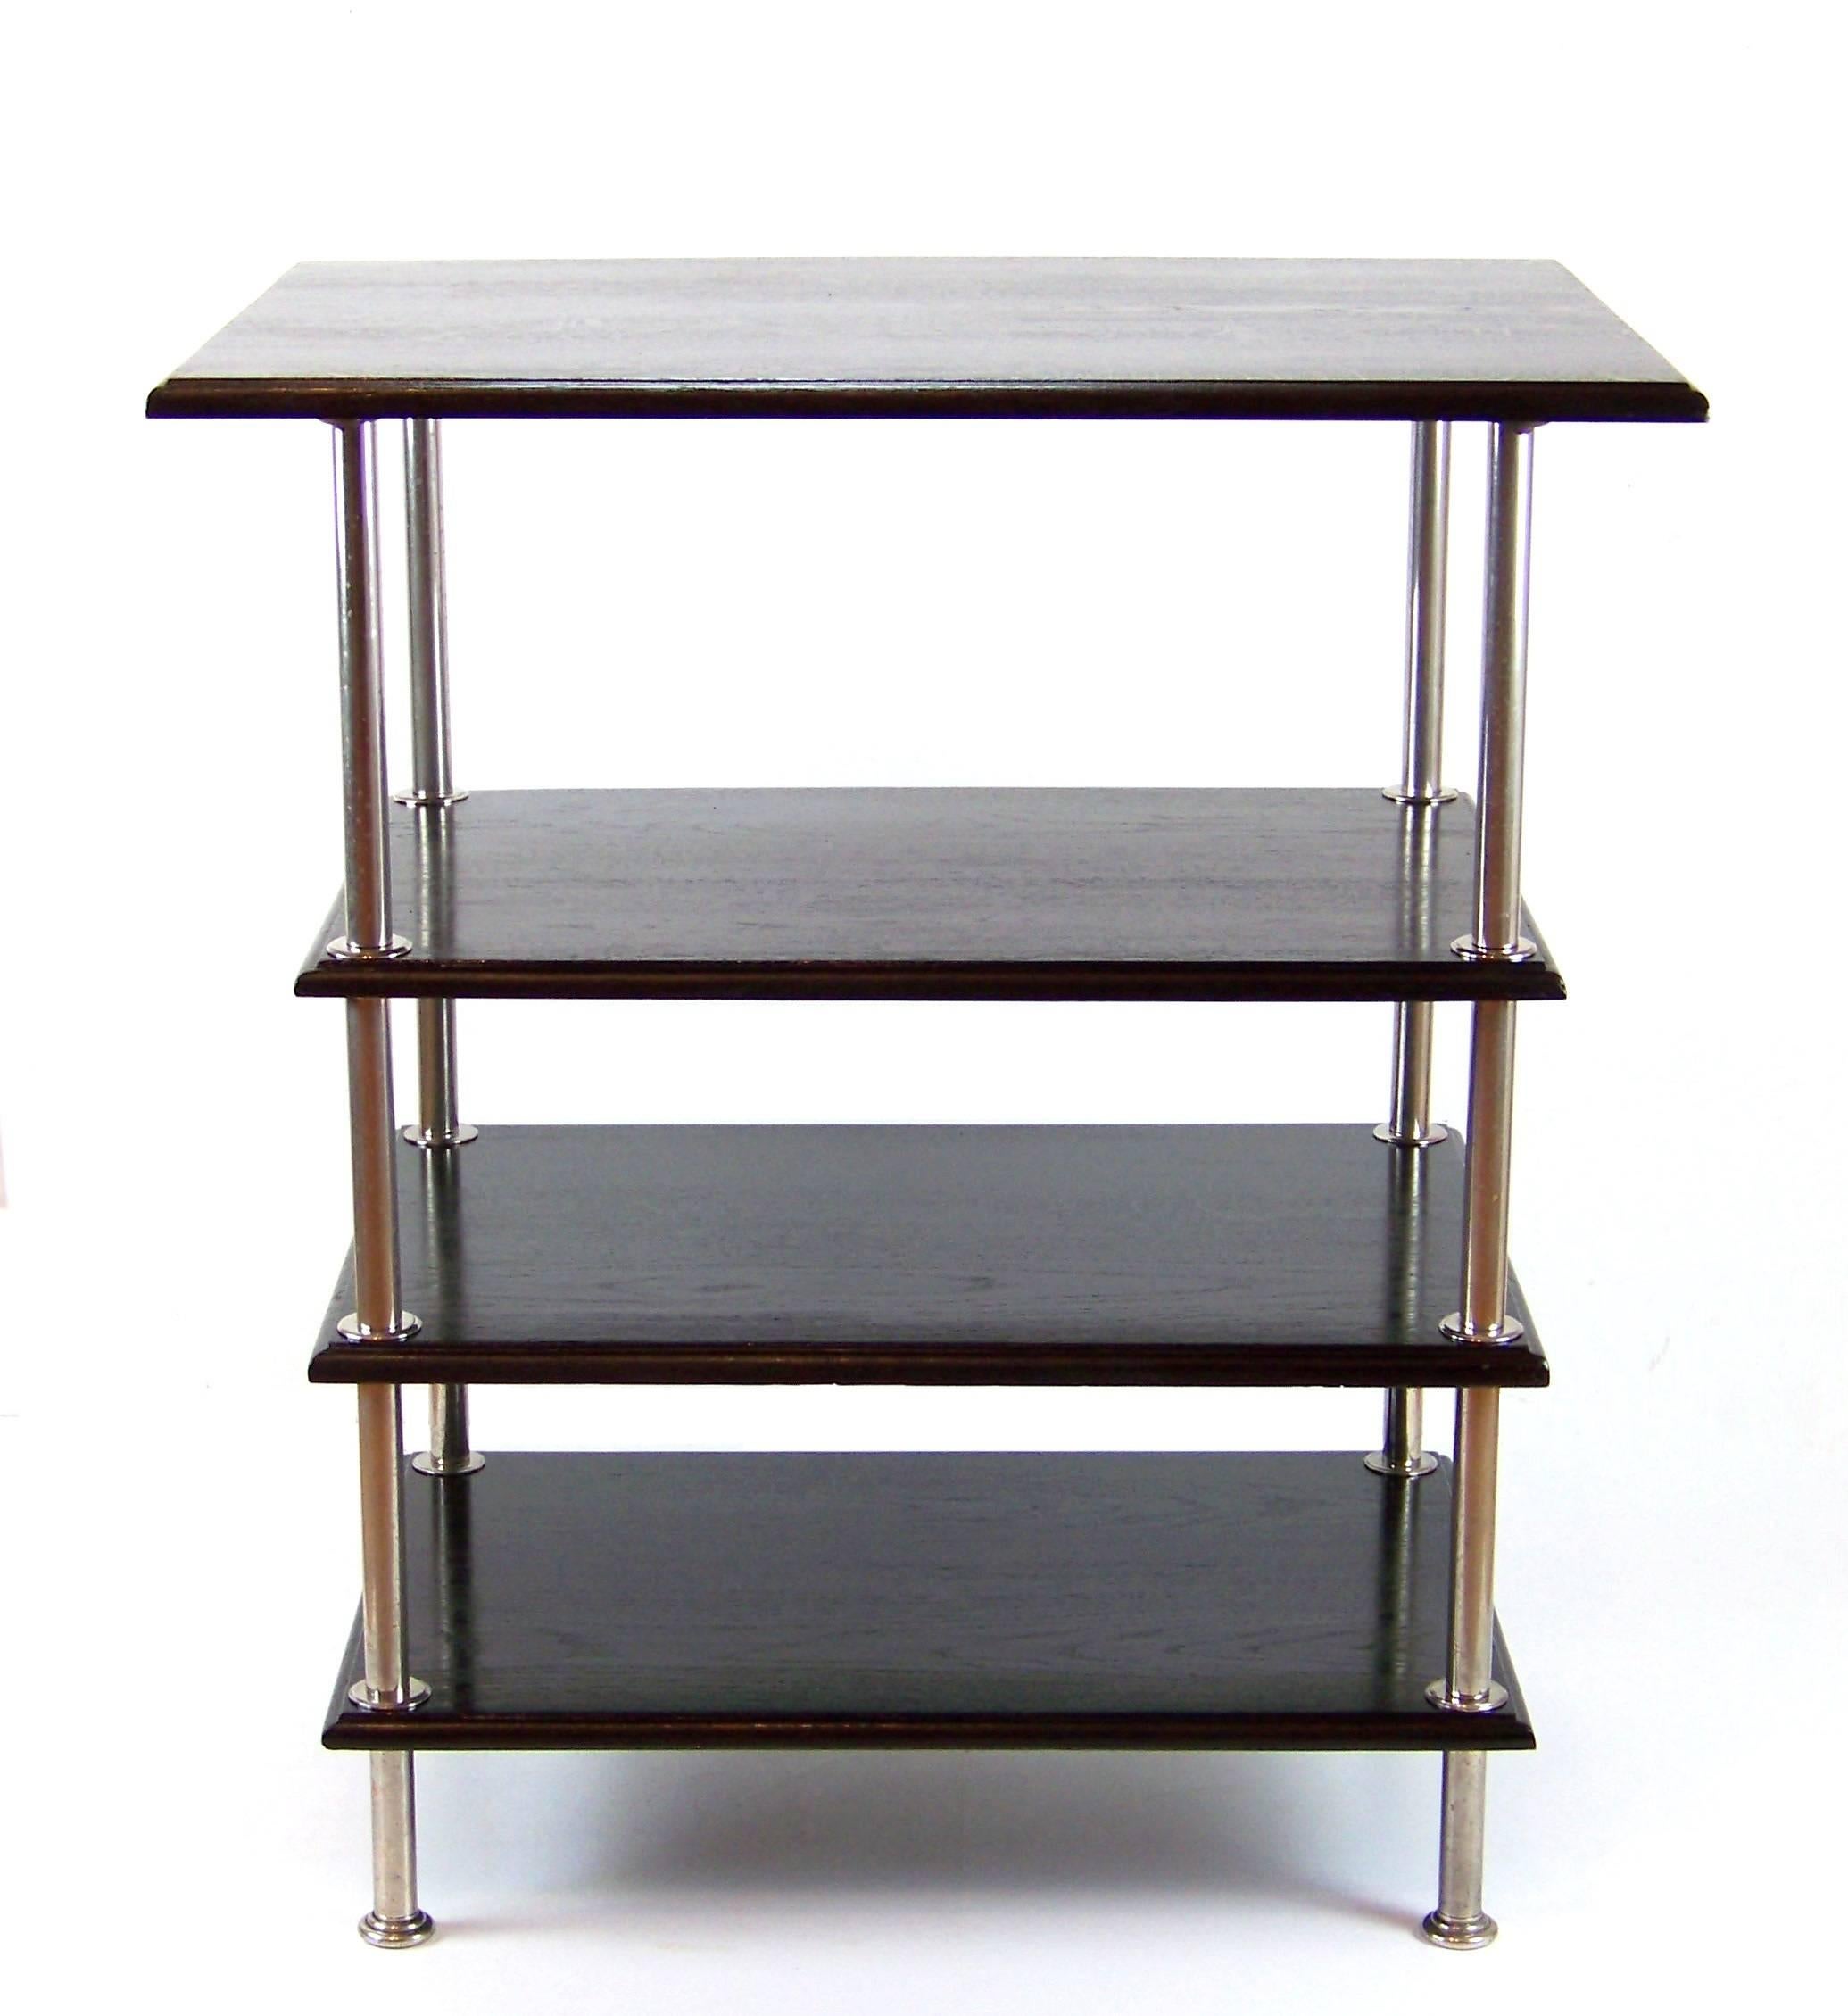 Central European origin. Early functionalist product. Made of chrome brass and massive oak boards. Wood newly restored.